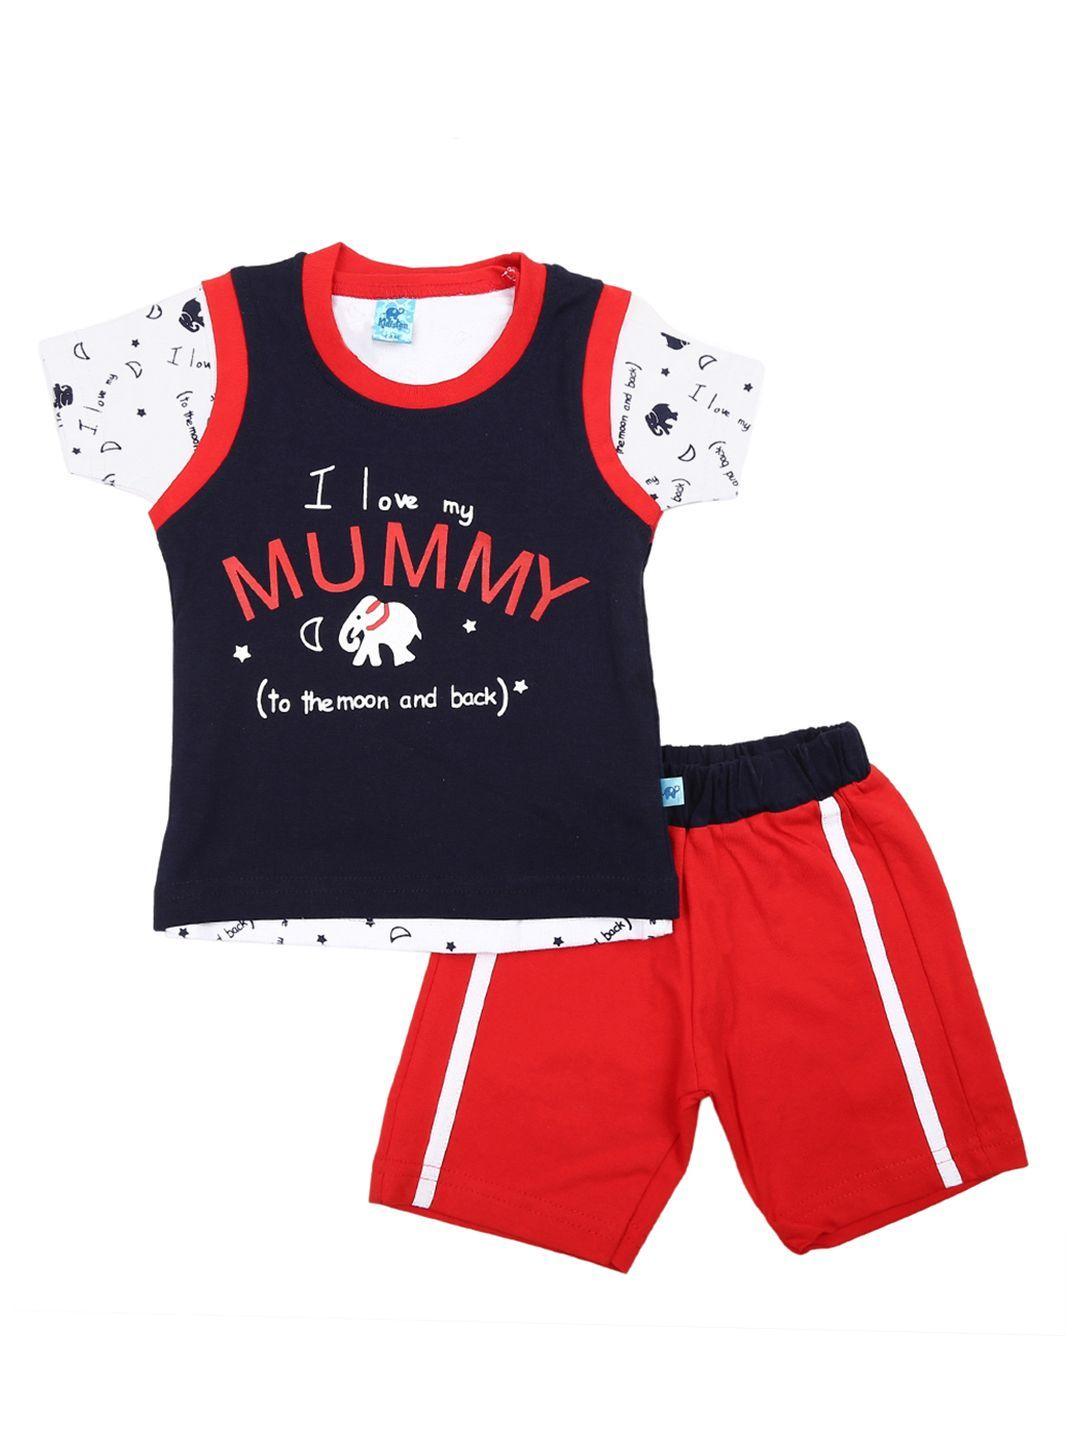 v-mart unisex kids navy blue & red printed pure cotton t-shirt with shorts